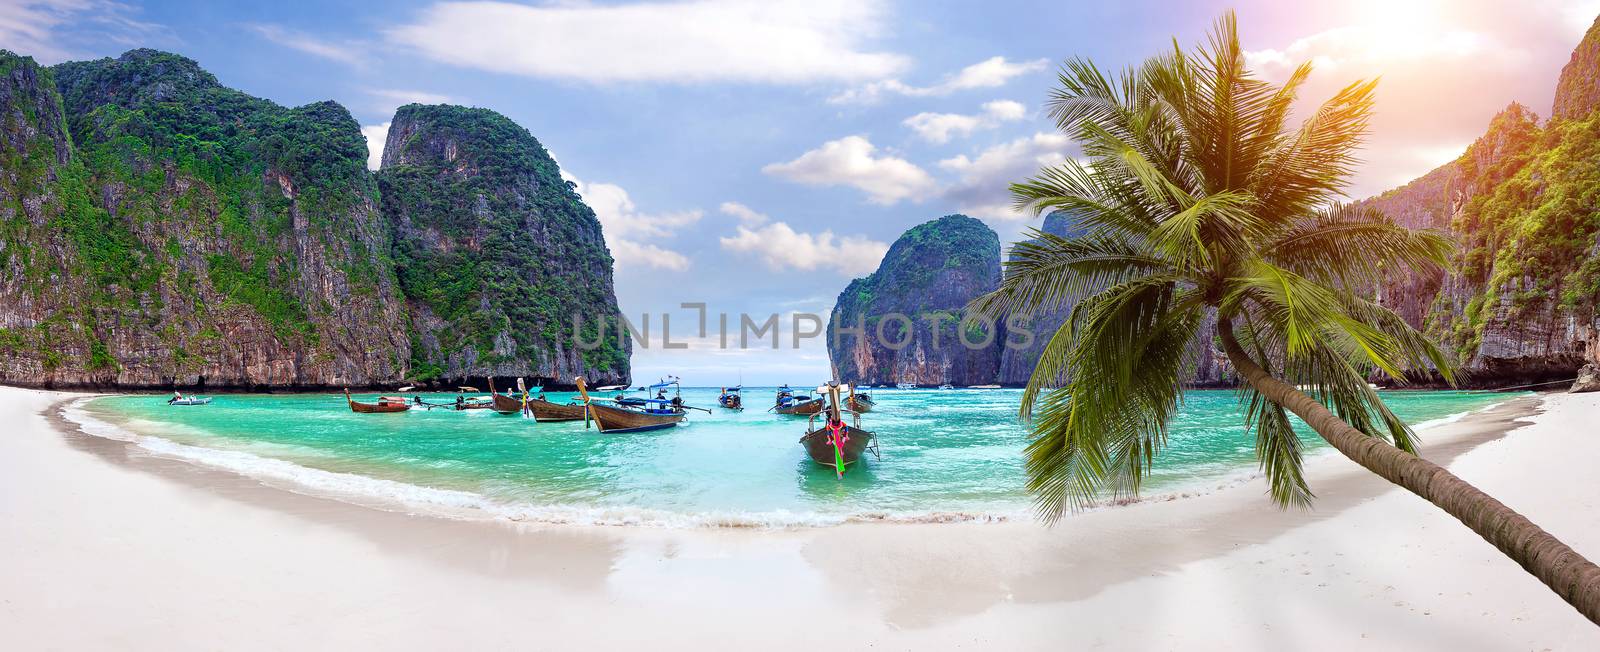 Panorama of Long boat and blue water at Maya bay in Phi Phi Island, Krabi Thailand. by gutarphotoghaphy